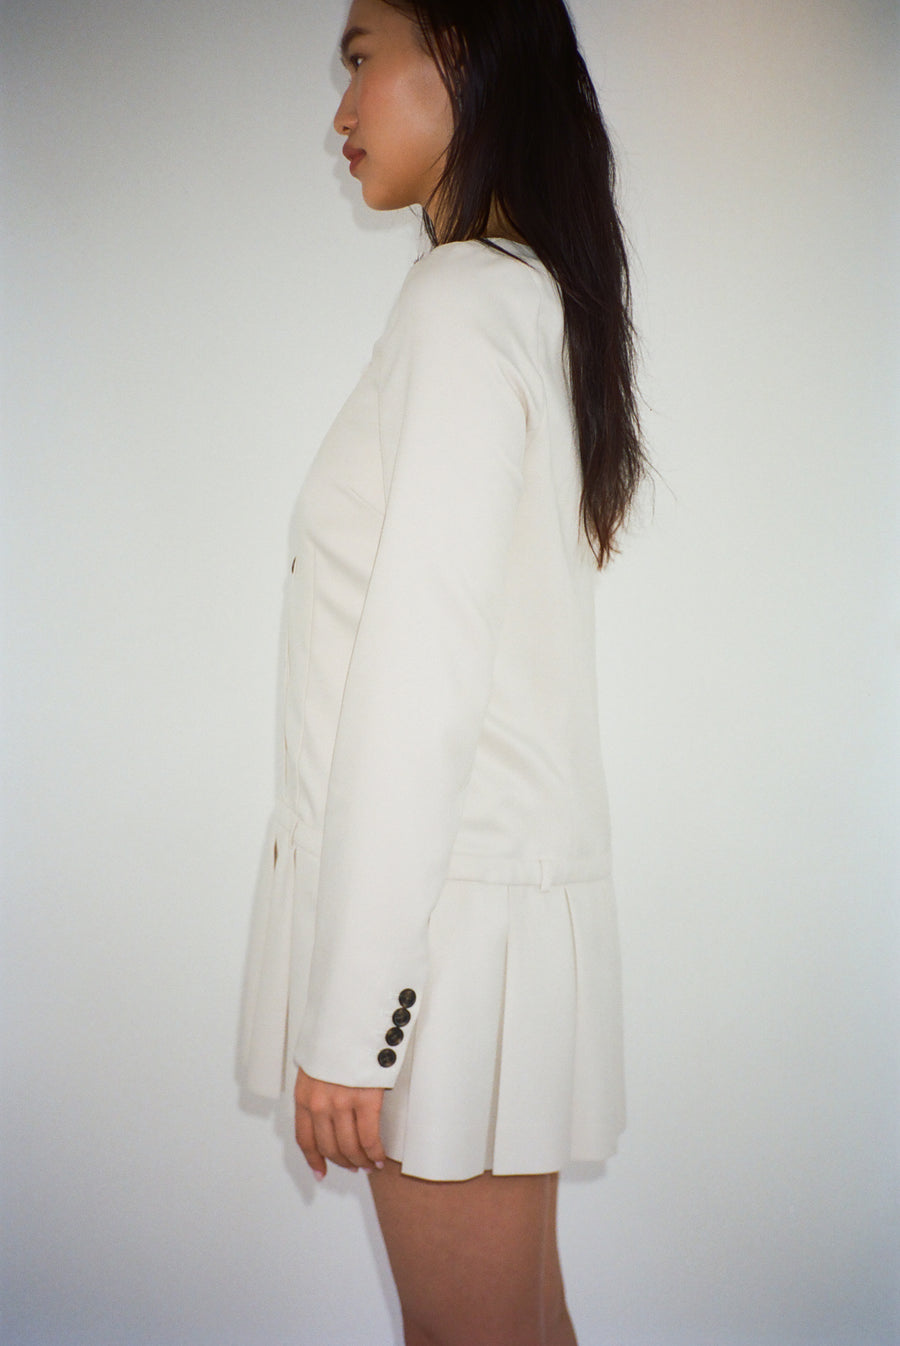 Long sleeve mini dress in off white suting with buttons and pleats on model